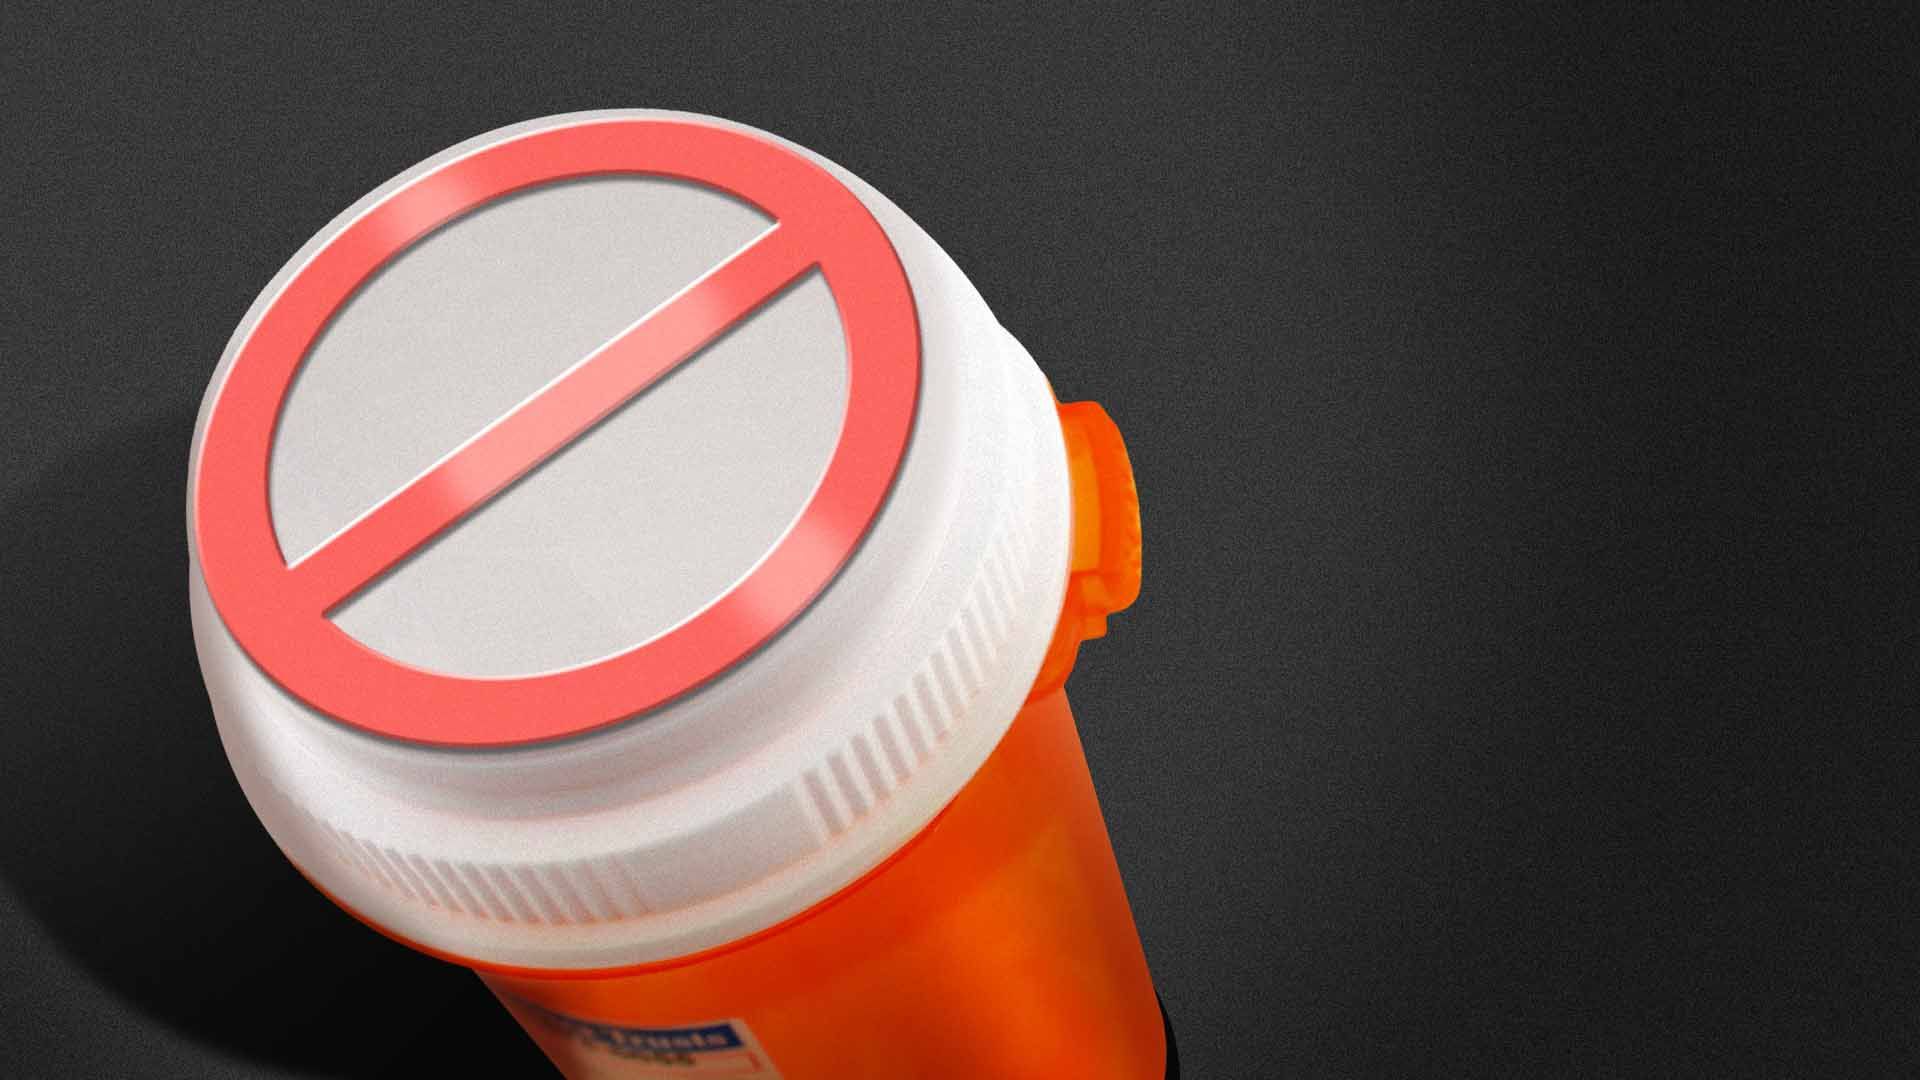 Illustration of a pill bottle with a "no" symbol on the lid